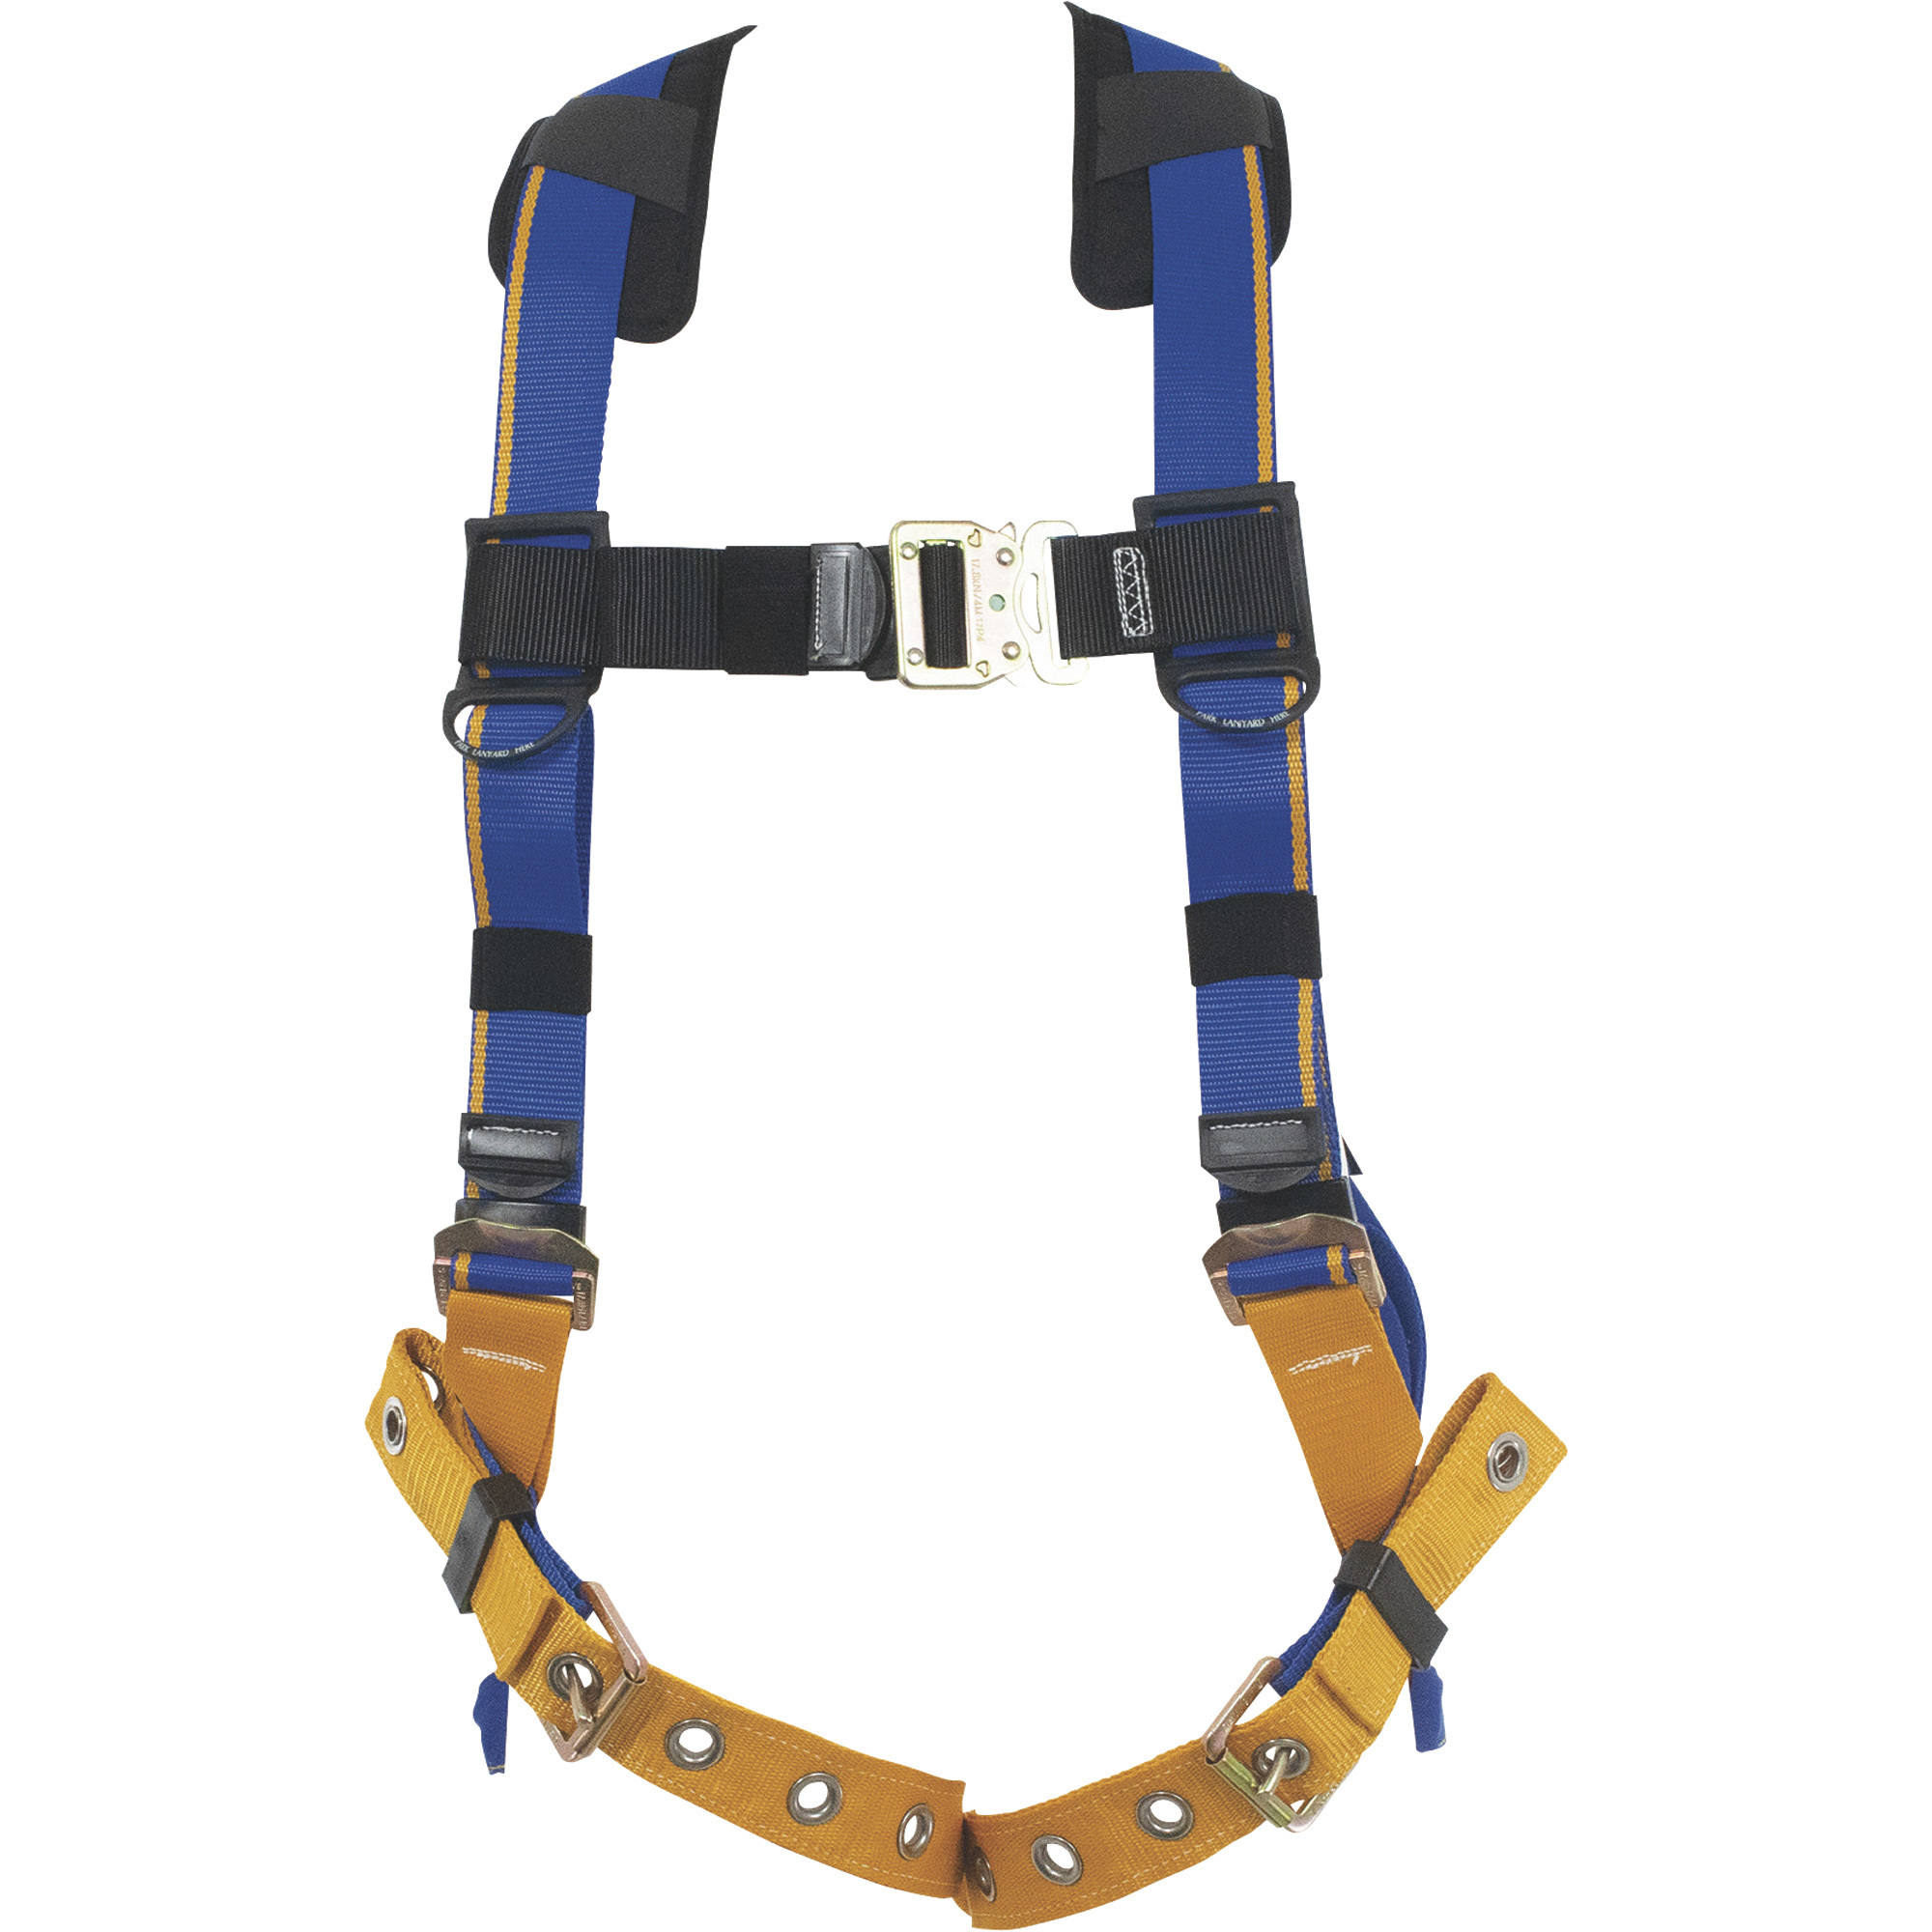 Werner Blue Armor 1-Ring Standard Safety Harness, Blue, Small, Model H112001